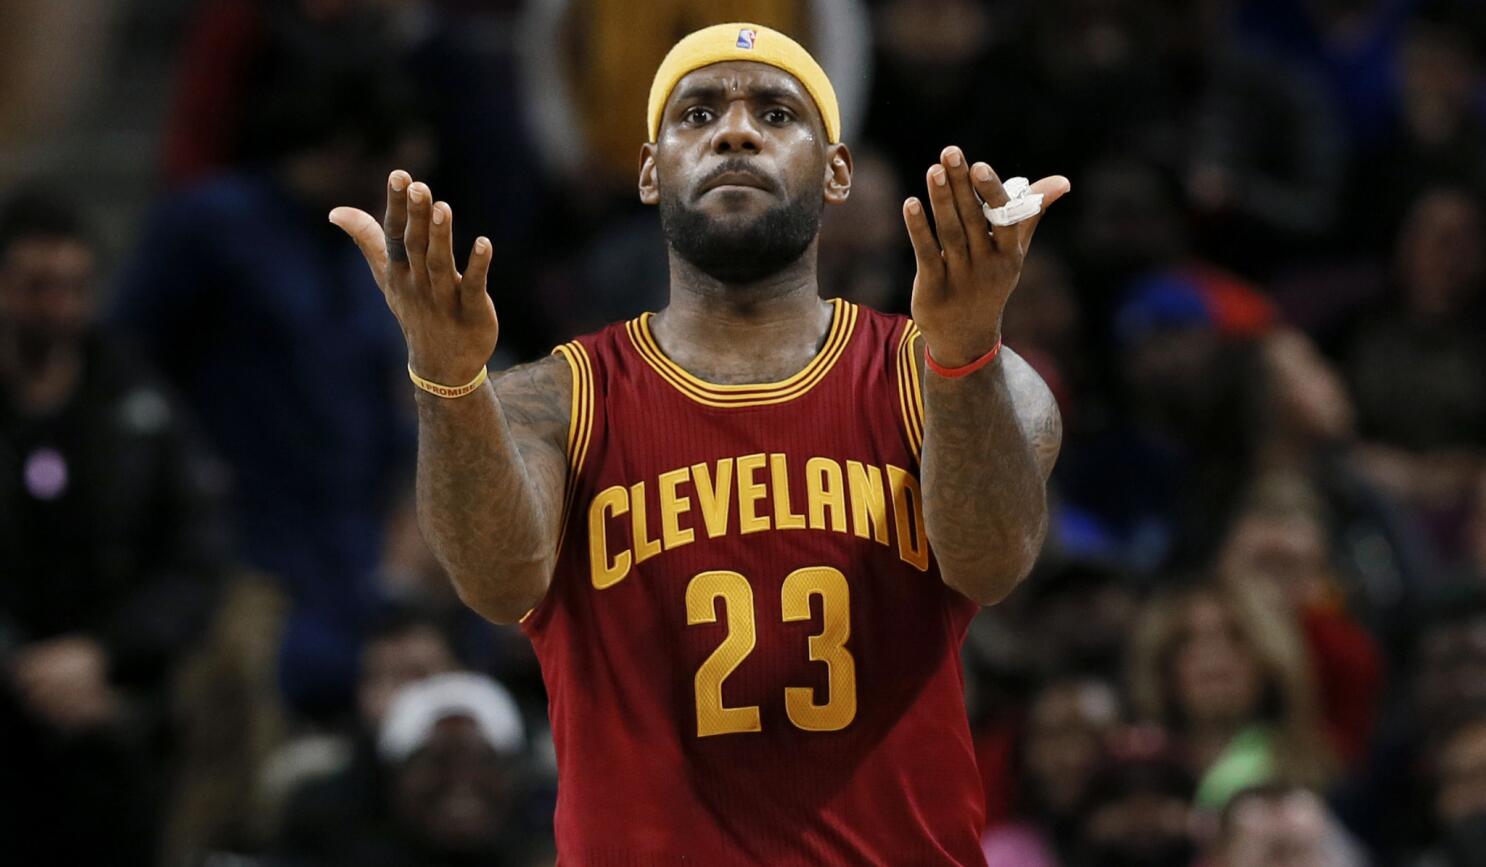 Is LeBron James' athleticism or skill responsible for his success